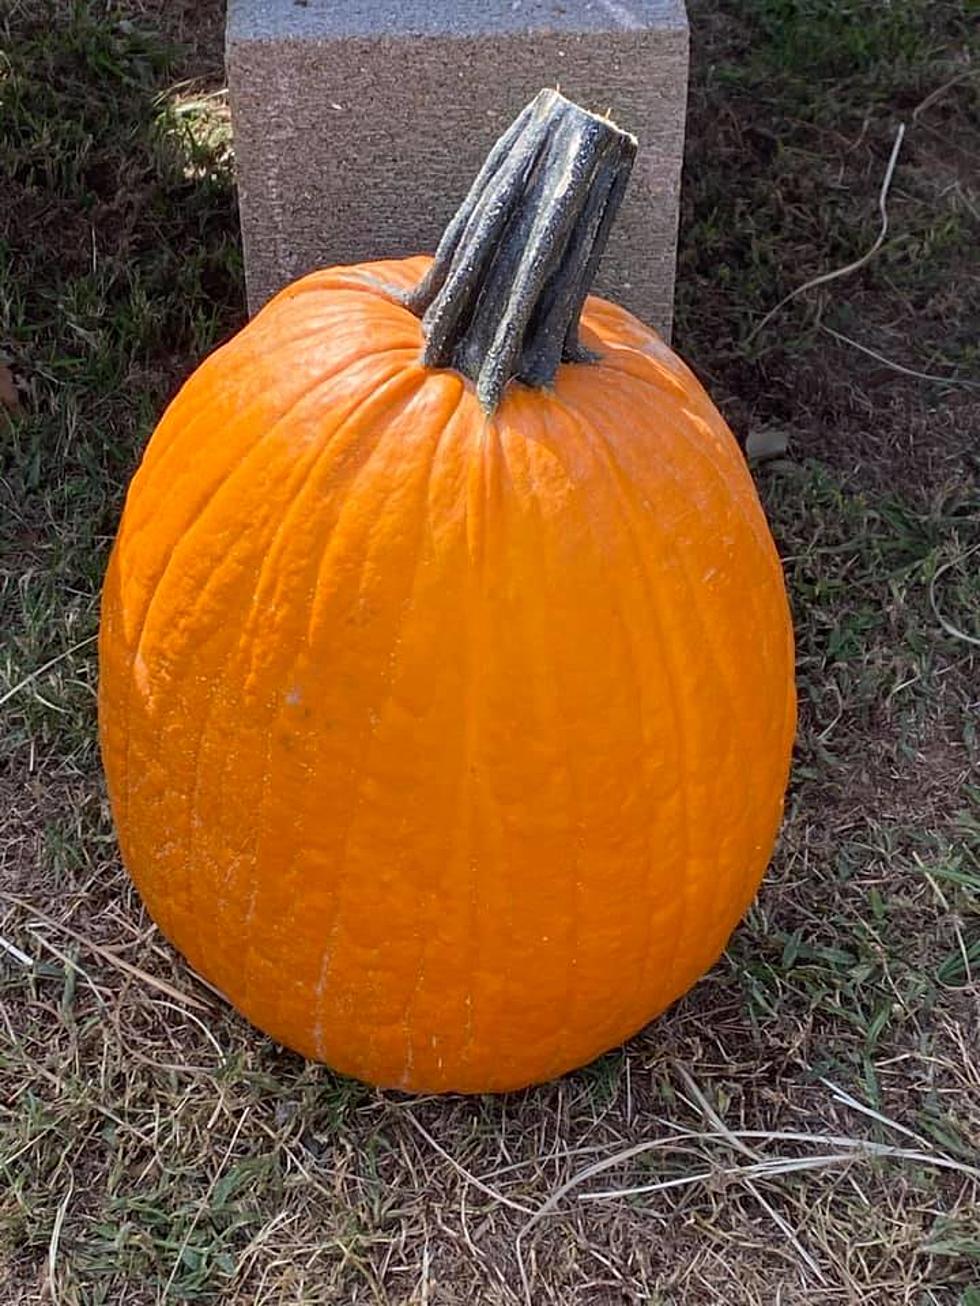 Here’s Our List of Best Pumpkin Patches in the Shreveport Area